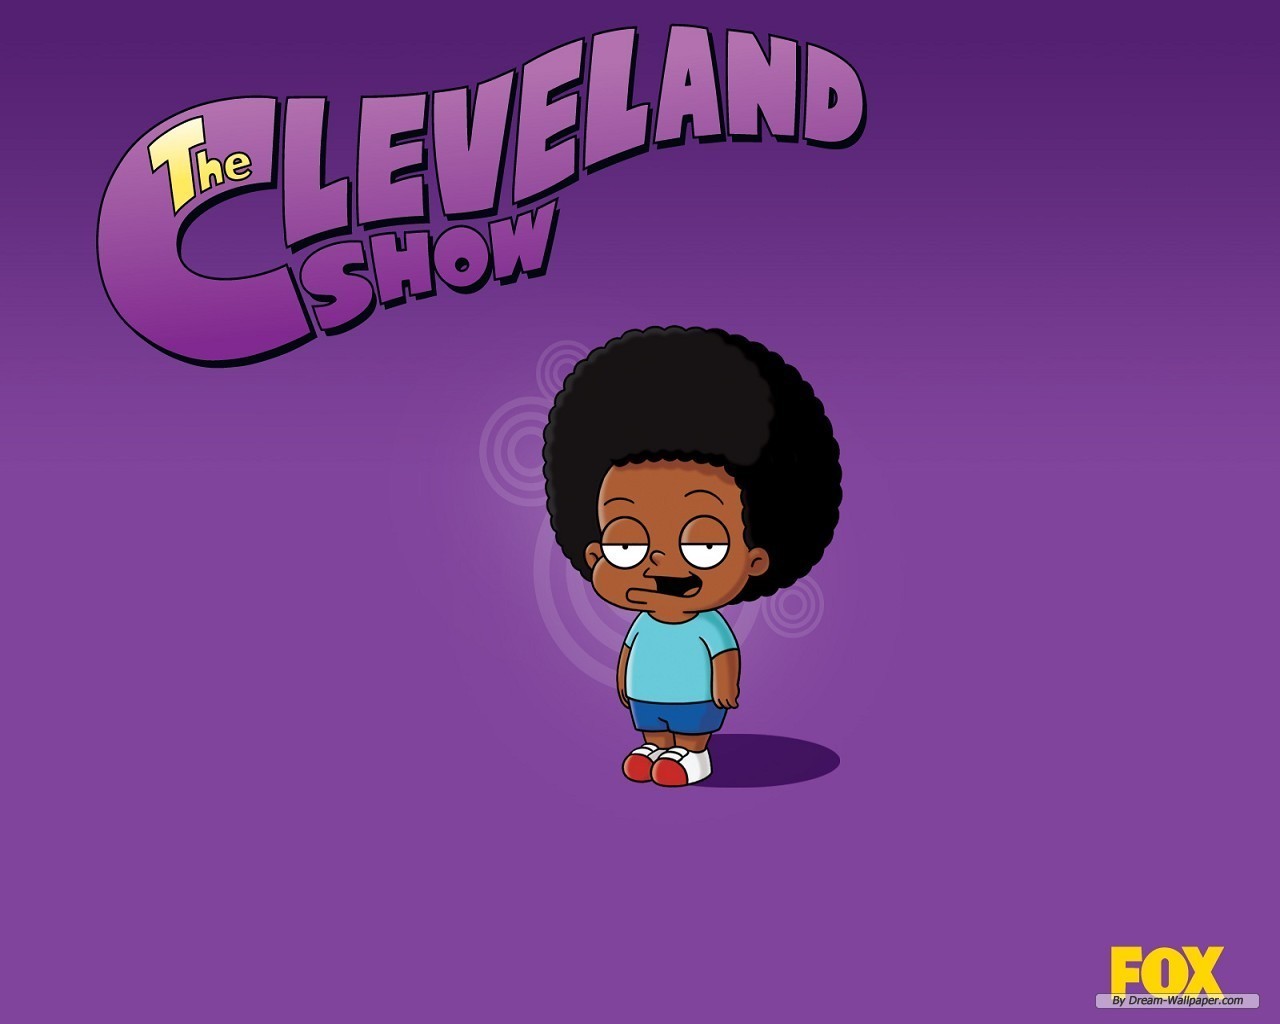 The Cleveland Show Image Rallo HD Wallpaper And